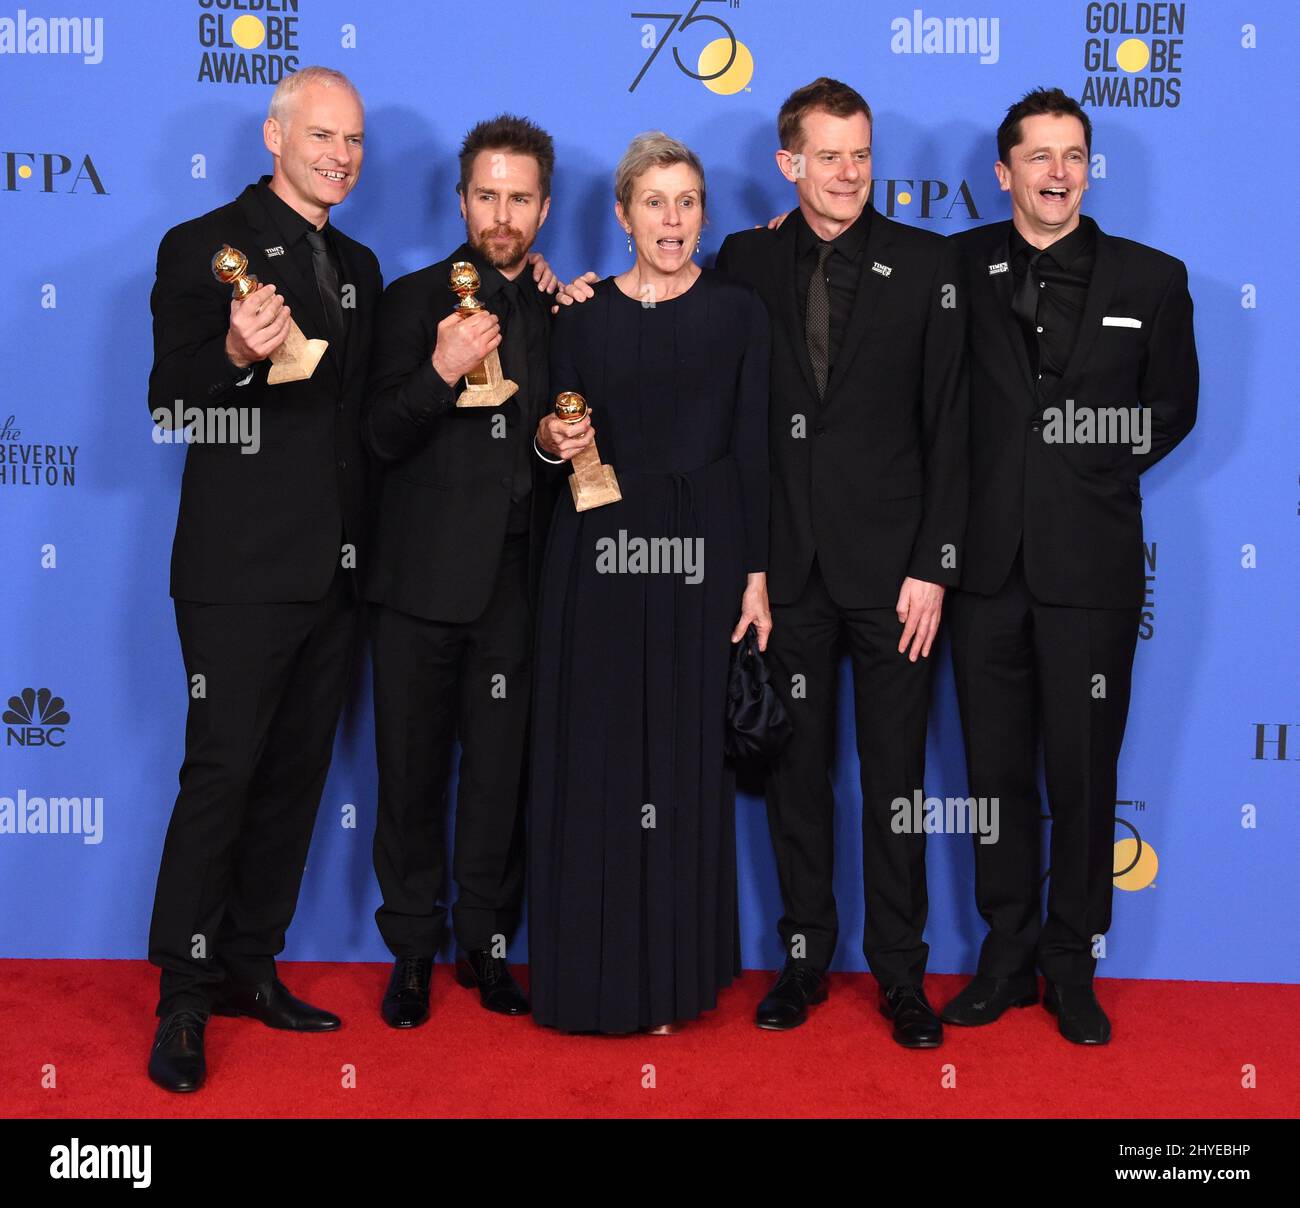 Three Billboards Outside Ebbing, Missouri 'Cast' in the press room at the 75th Annual Golden Globe Awards held at the Beverly Hilton Hotel on January 7, 2018 in Beverly Hills, CA Stock Photo